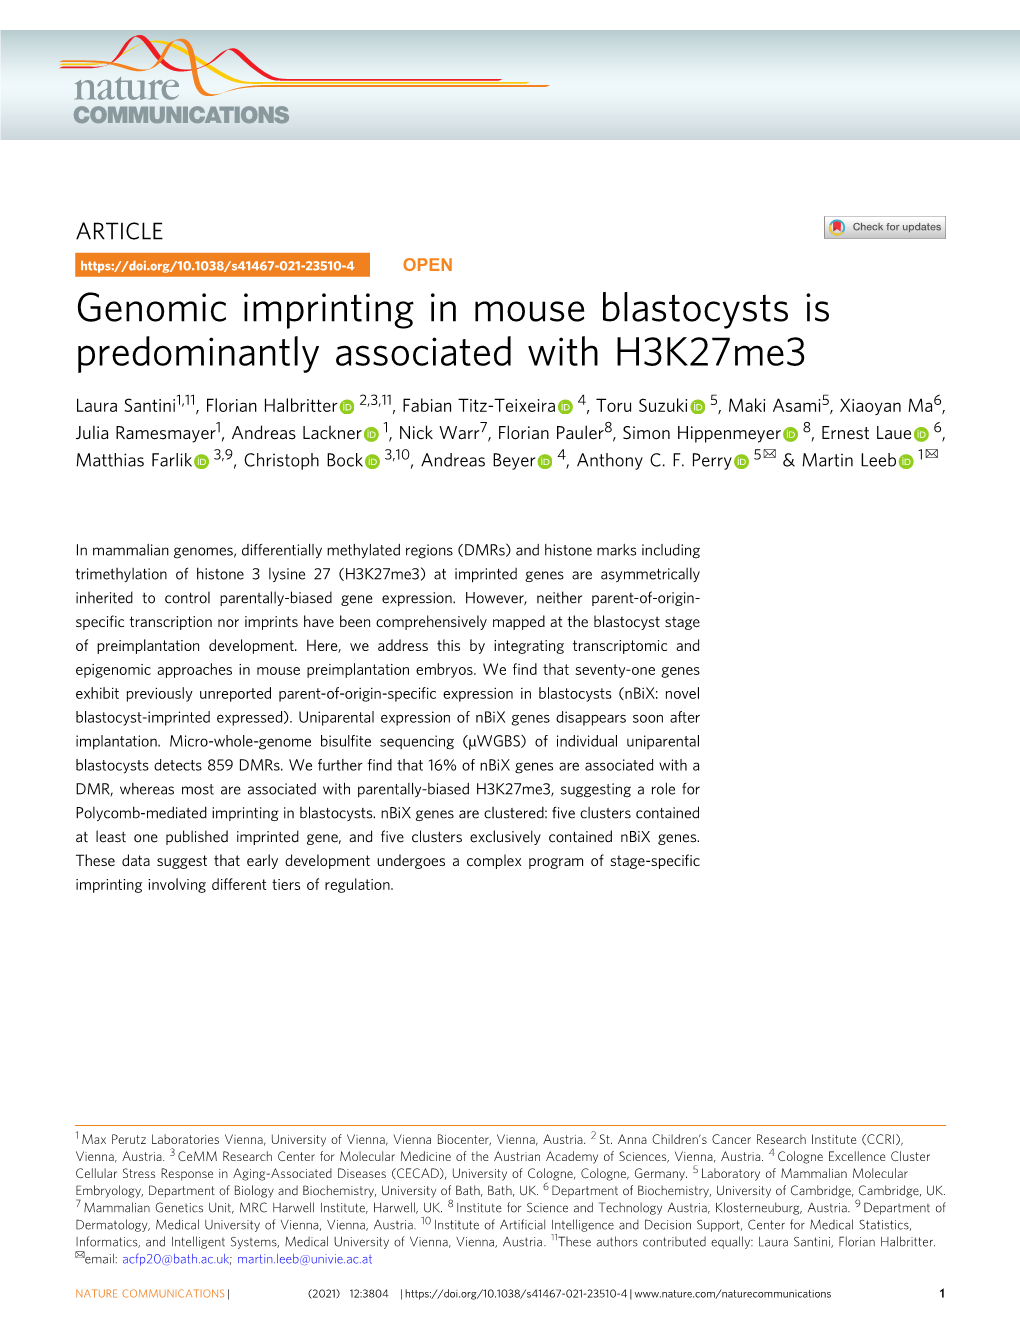 Genomic Imprinting in Mouse Blastocysts Is Predominantly Associated with H3k27me3